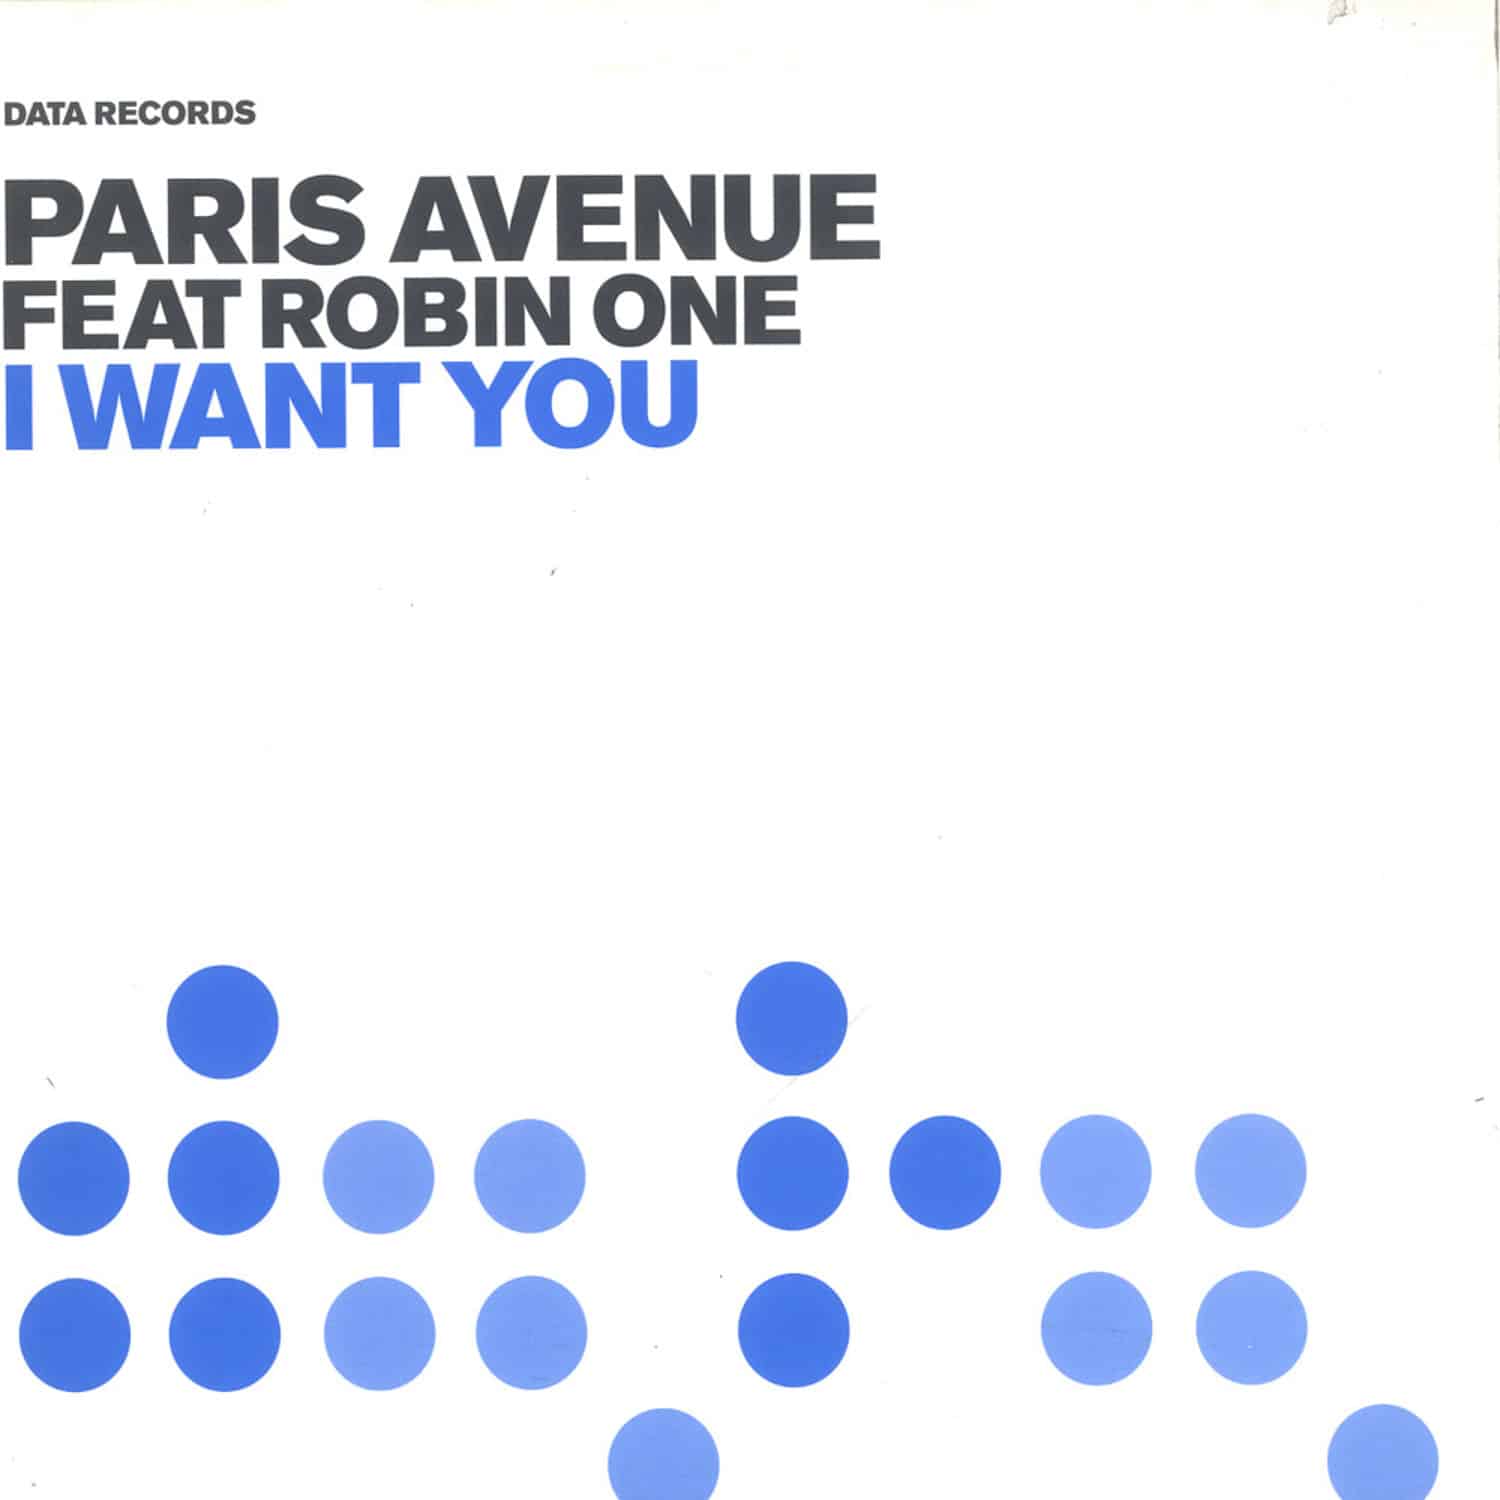 Paris Avenue feat Robin One - I WANT YOU